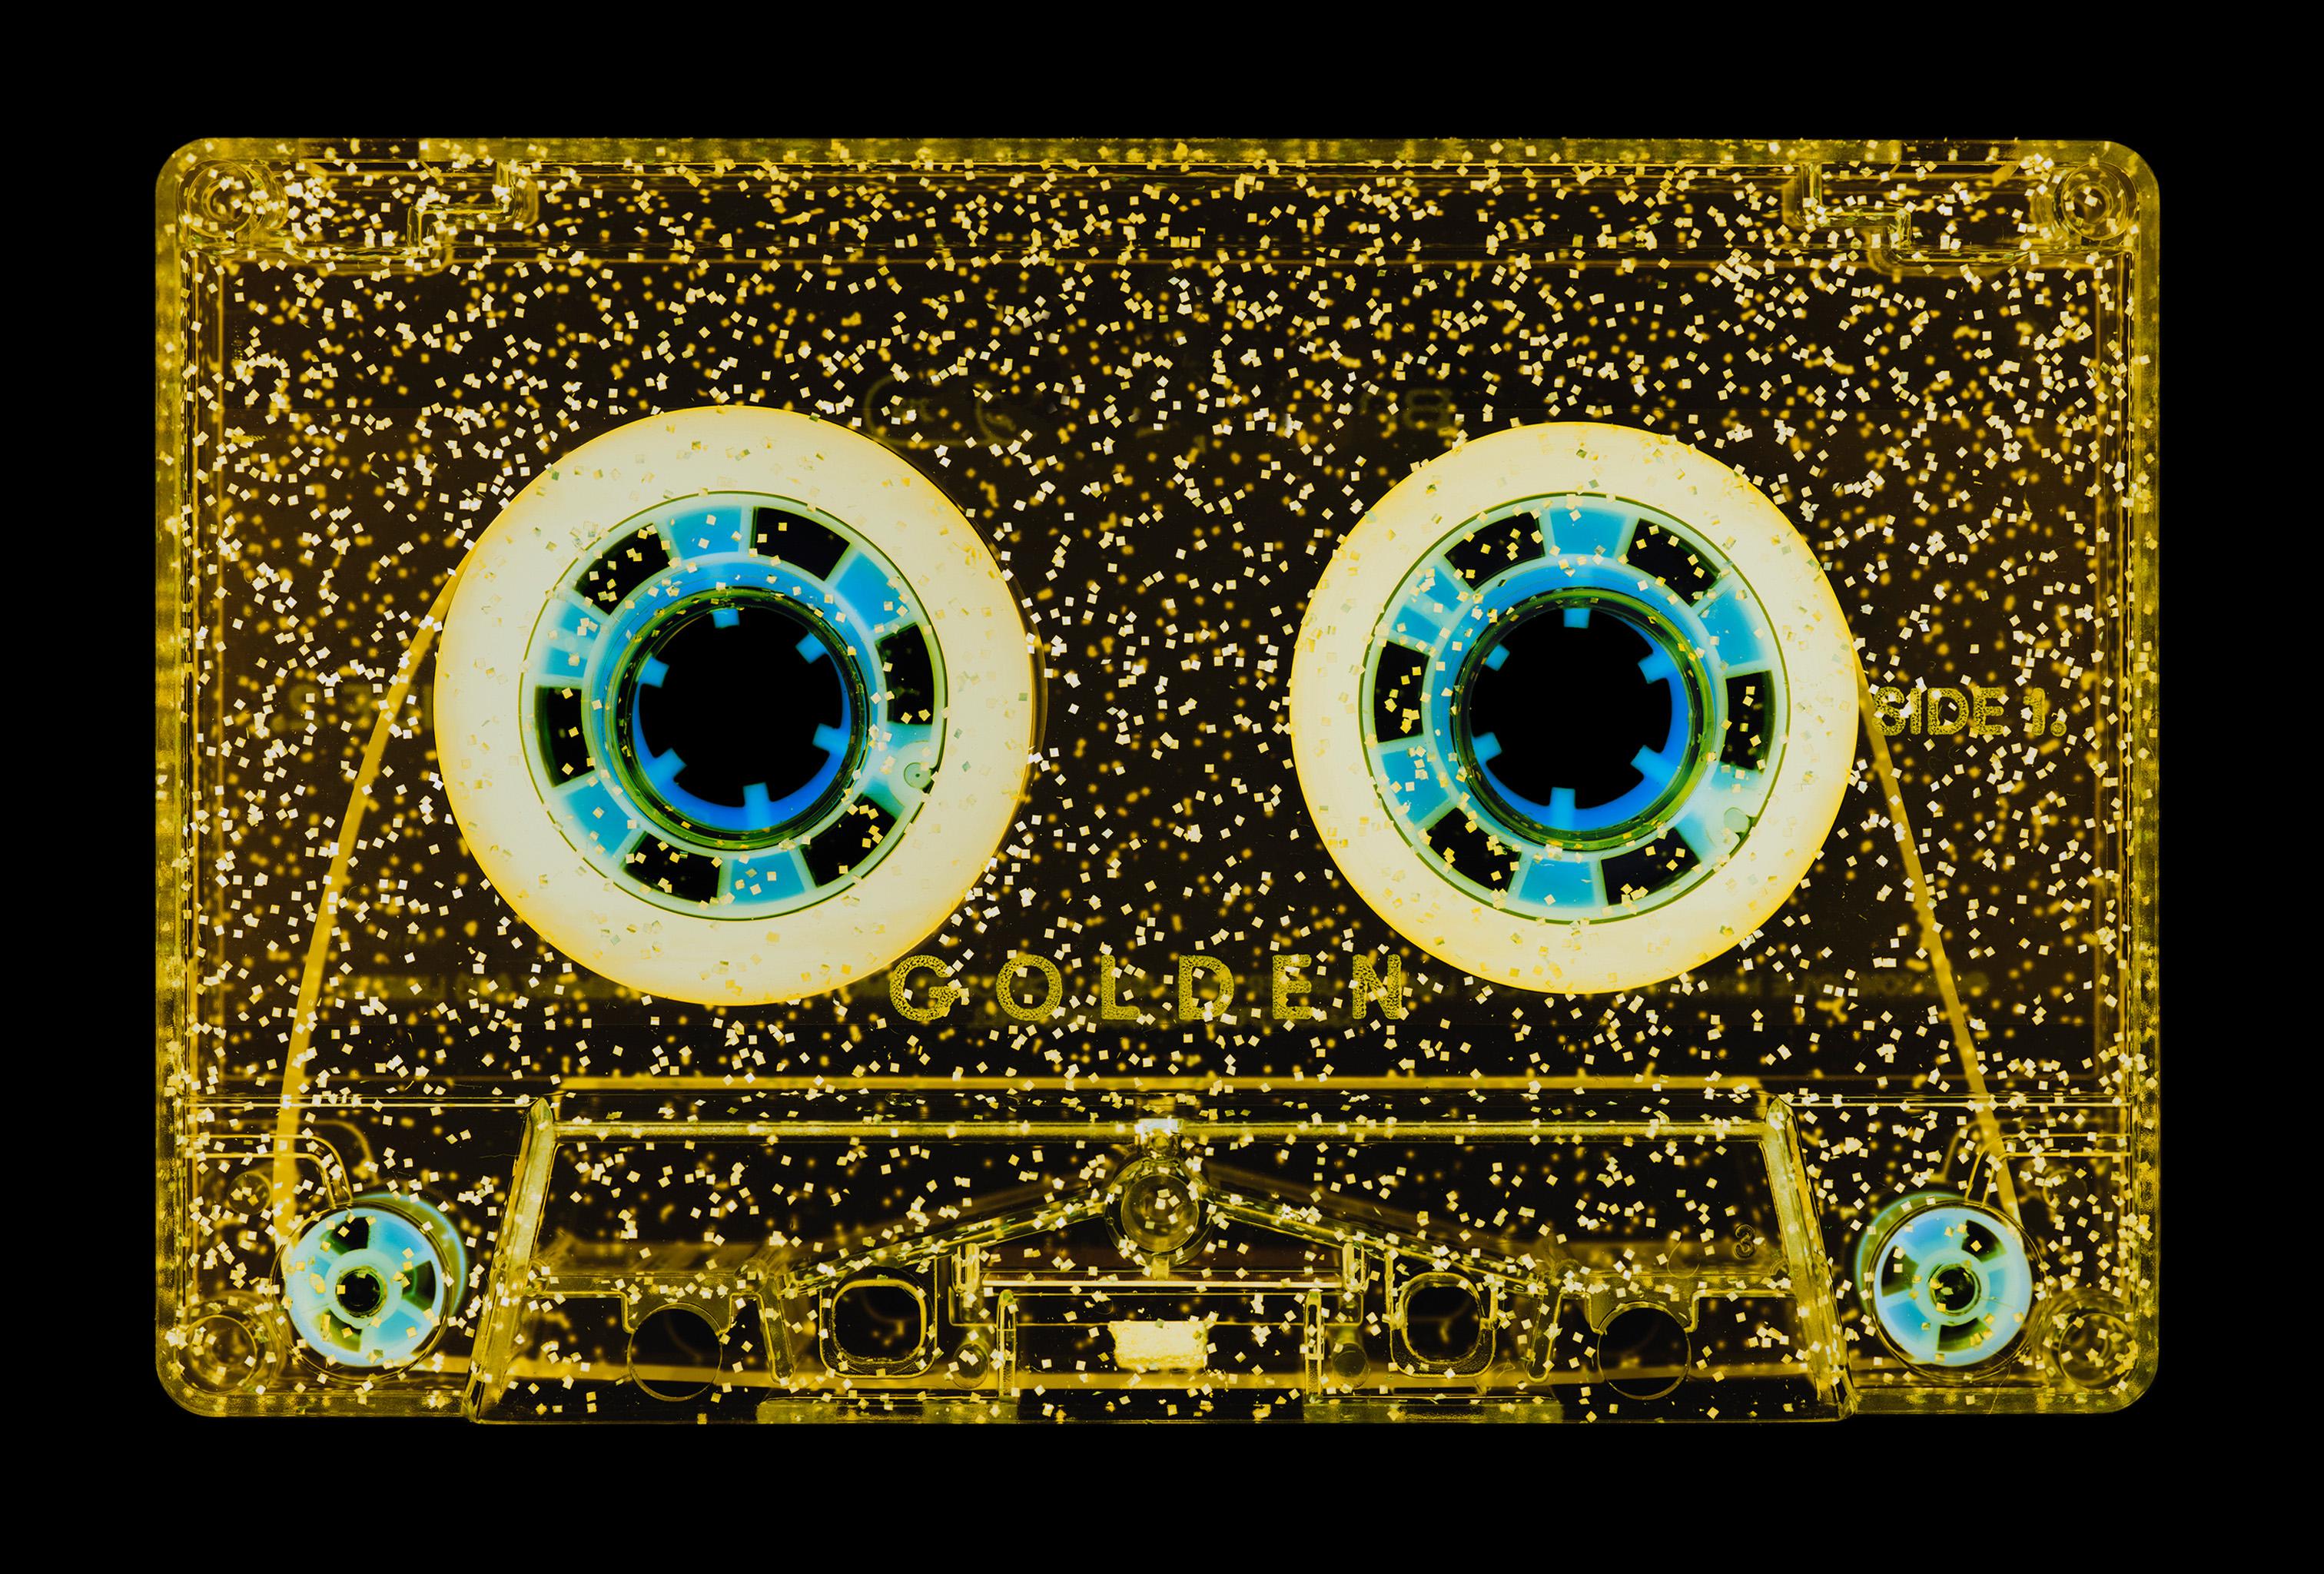 Heidler & Heeps Print - Tape Collection, All That Glitters is Golden - Pop Art Photography